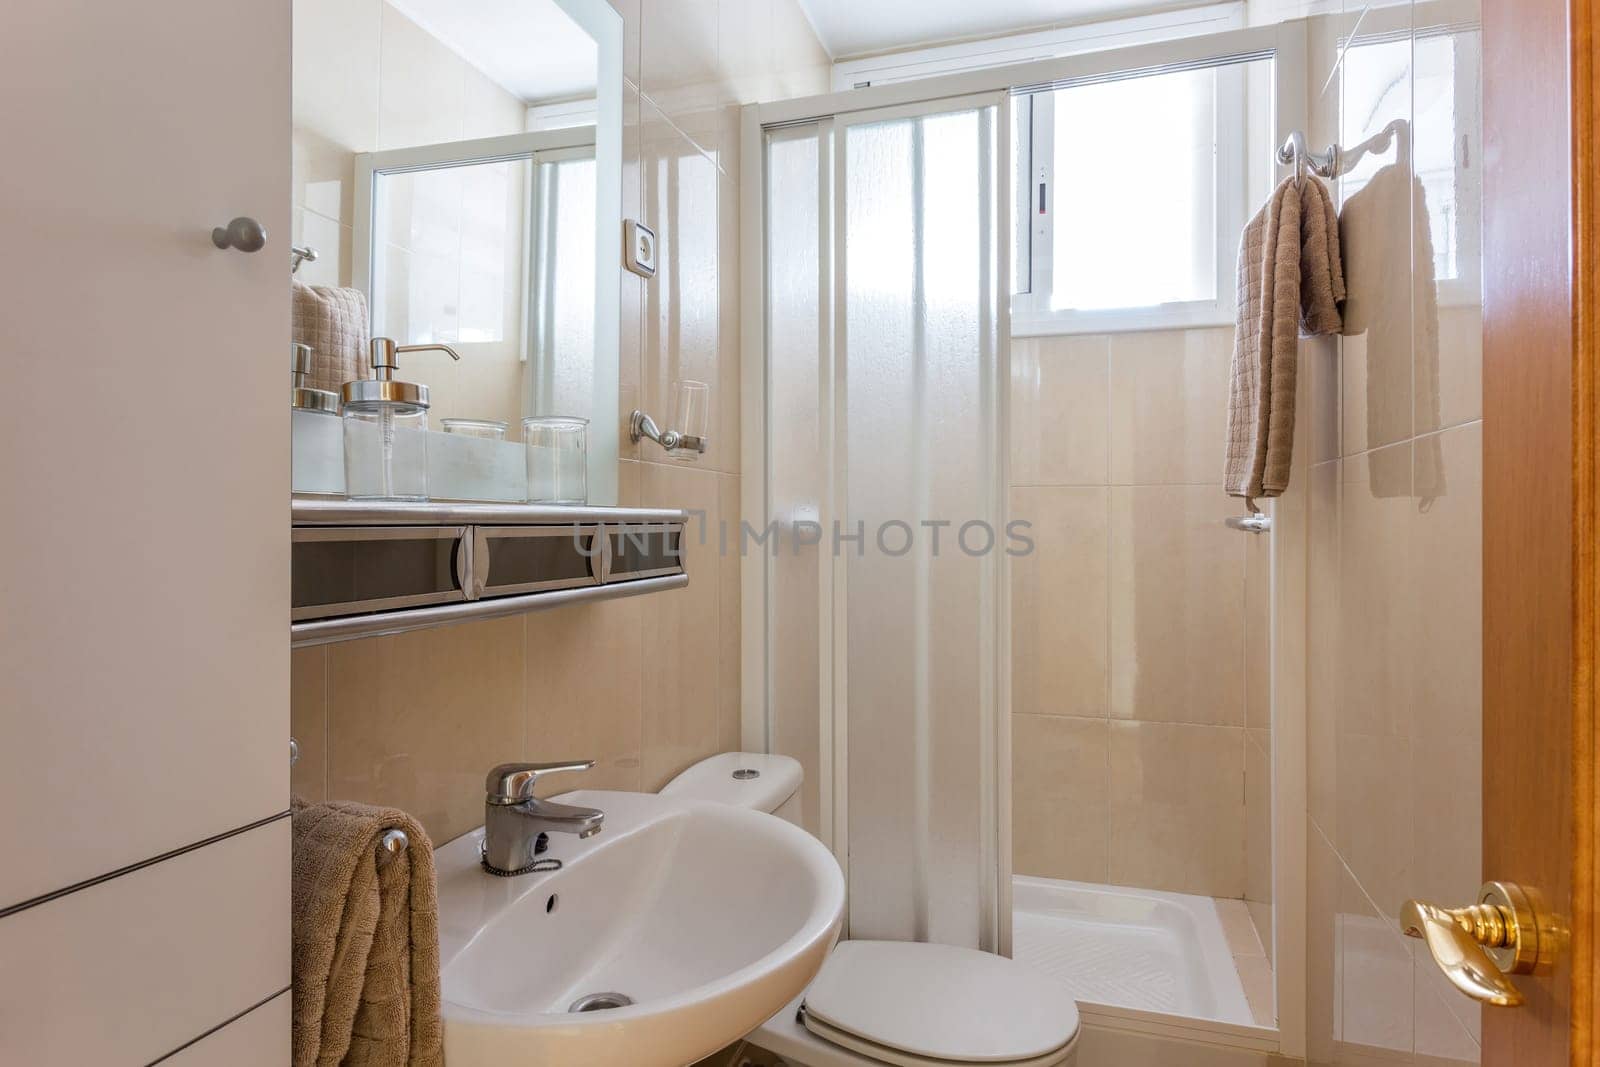 Simple style interior of small restroom with beige ceramic tile walls, white sink, classic WC toilet and shower cabin